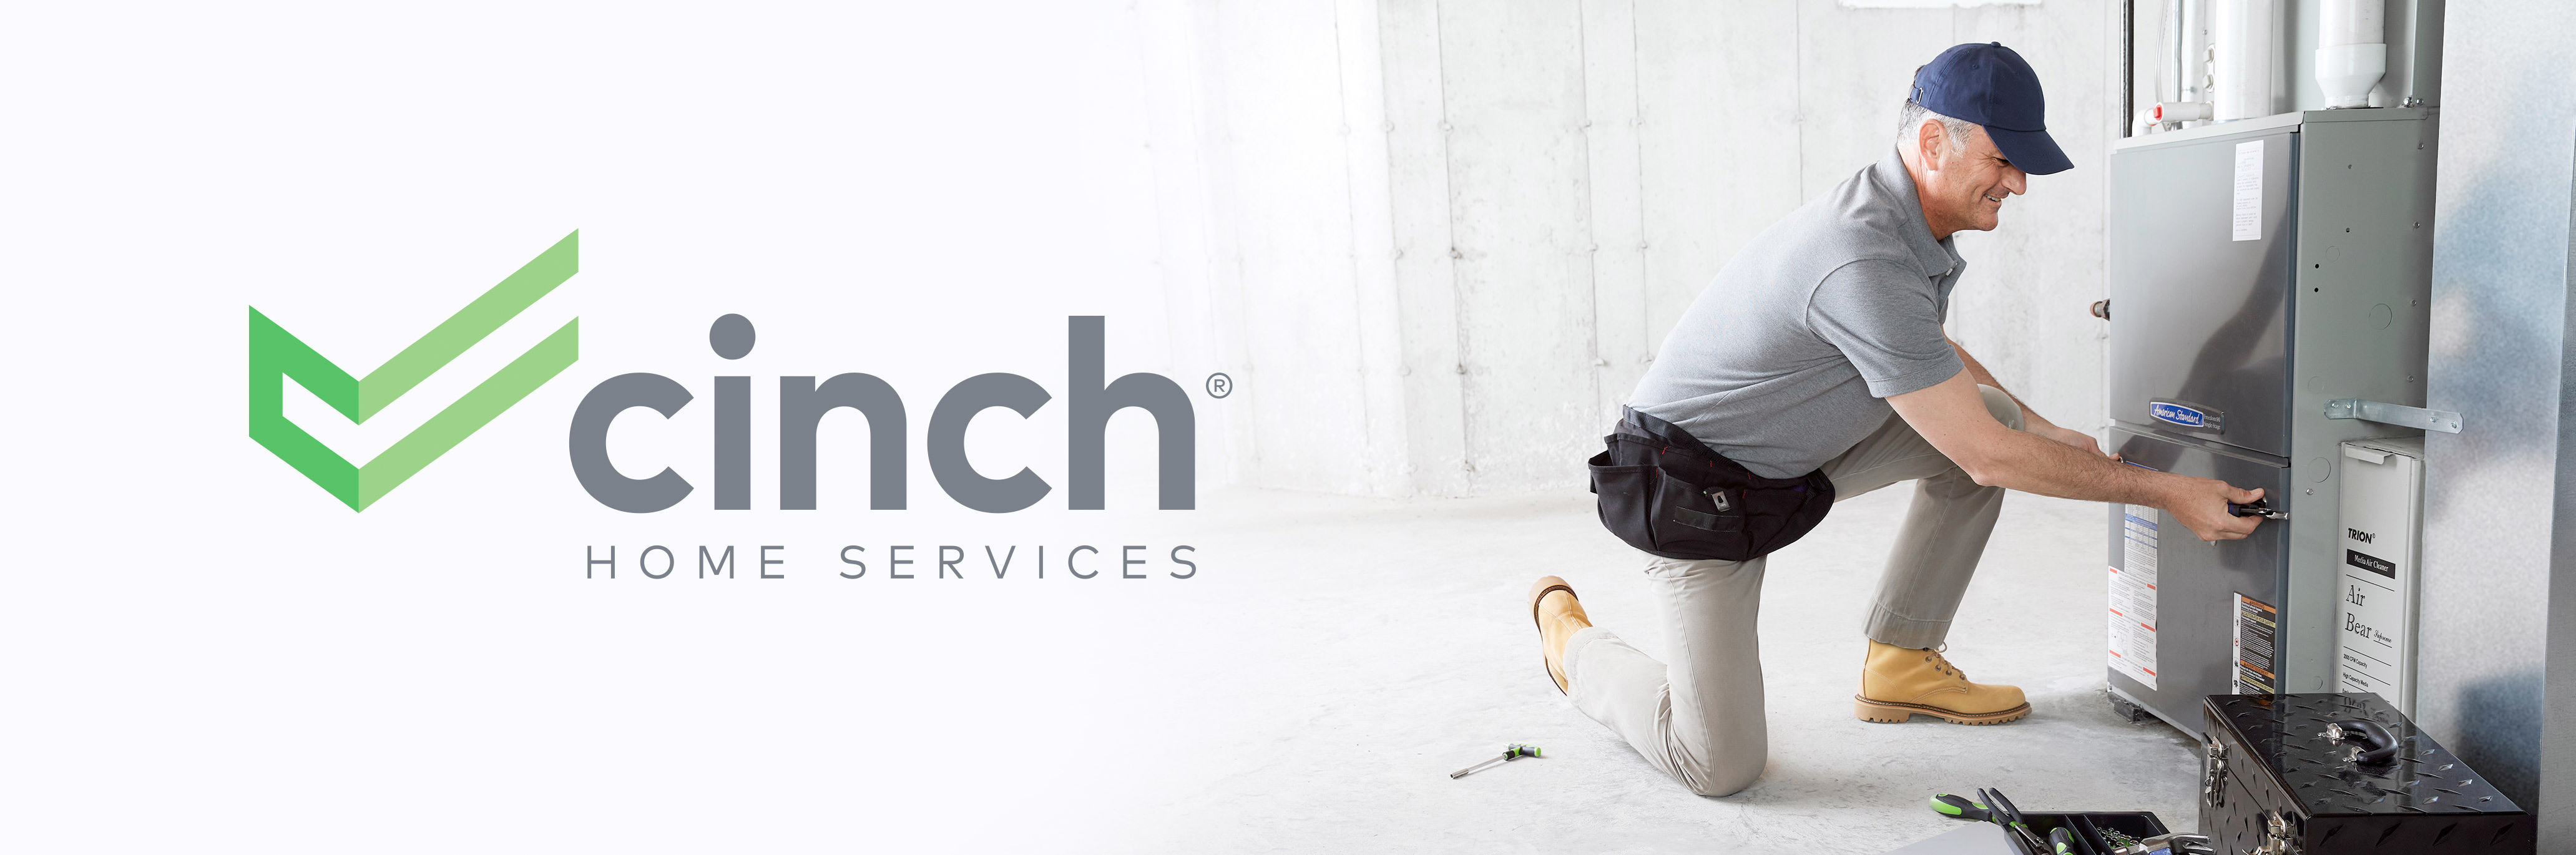 Cinch logo with a repairman in a gray shirt and pants and navy blue hat fixing an A/C unit